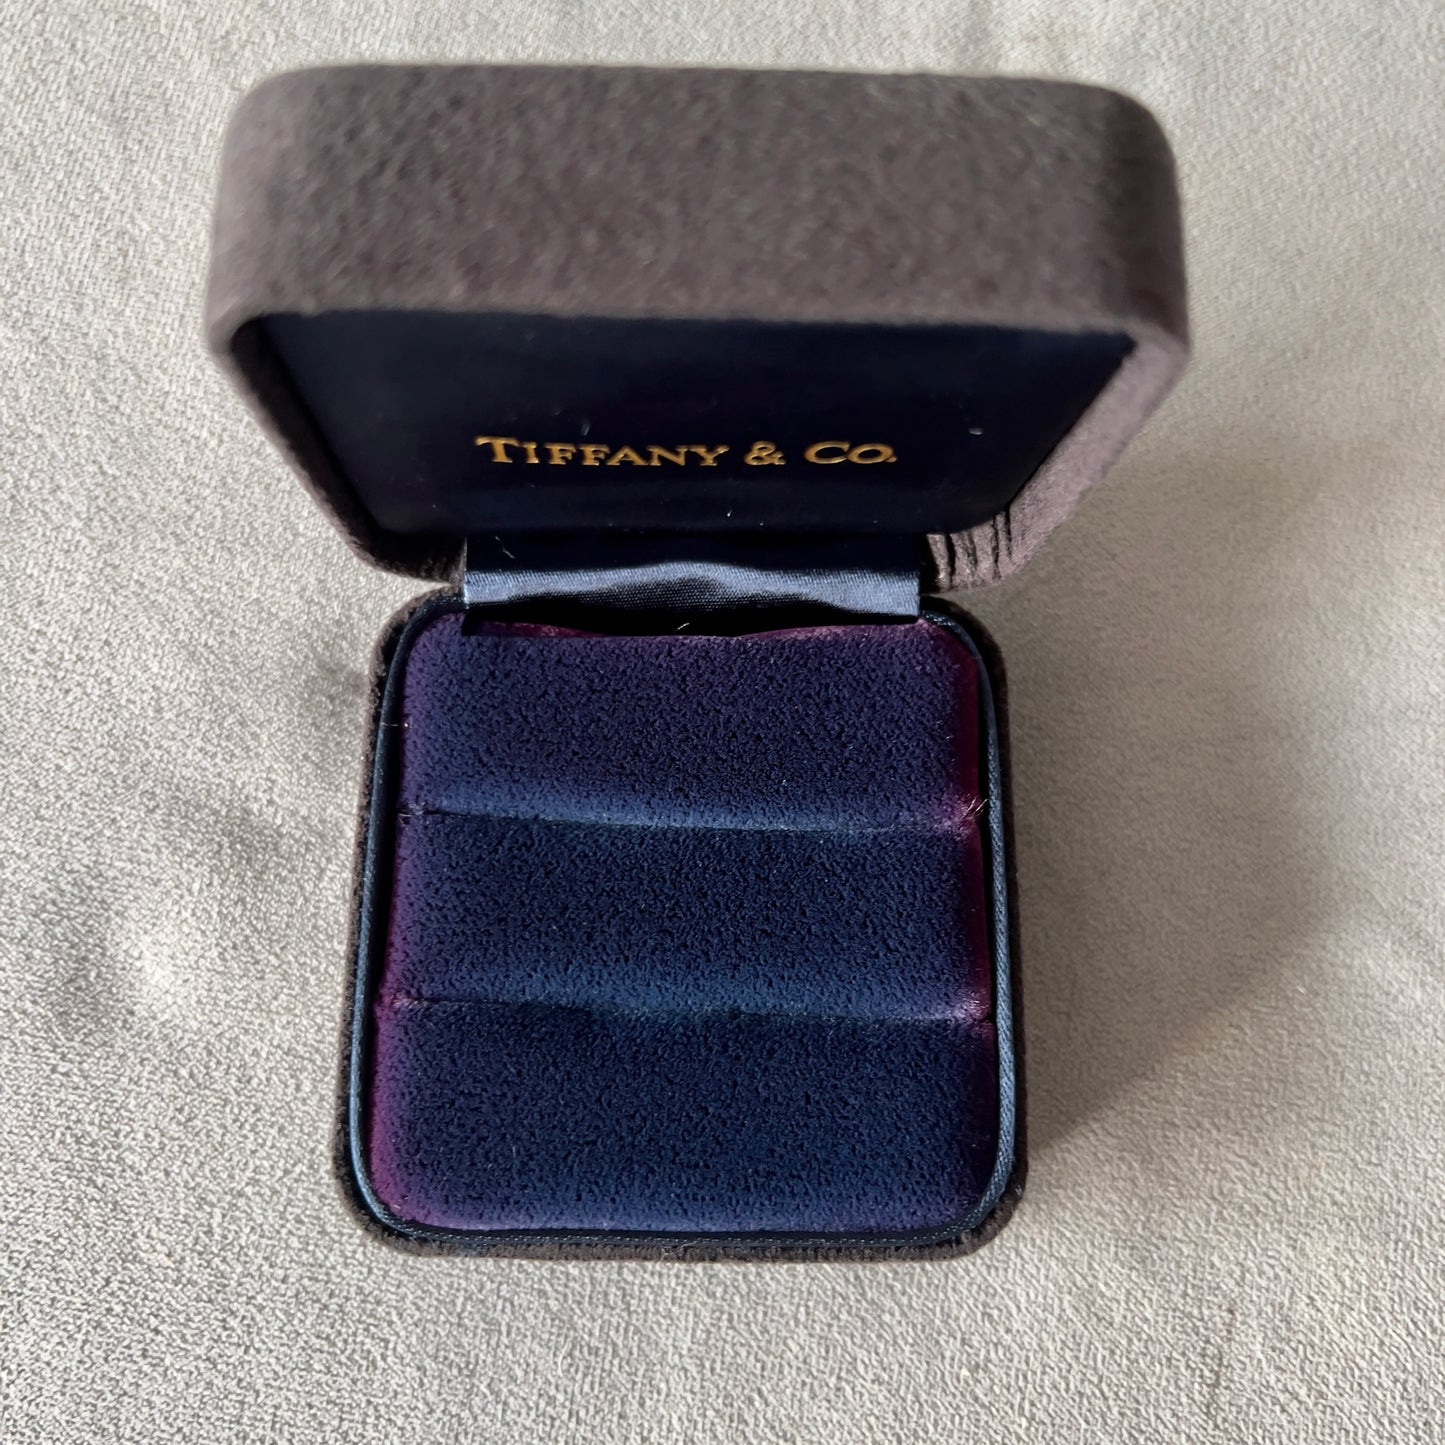 TIFFANY & CO. Double Alliance Ring Box 2.75x2.75x1.5 inches